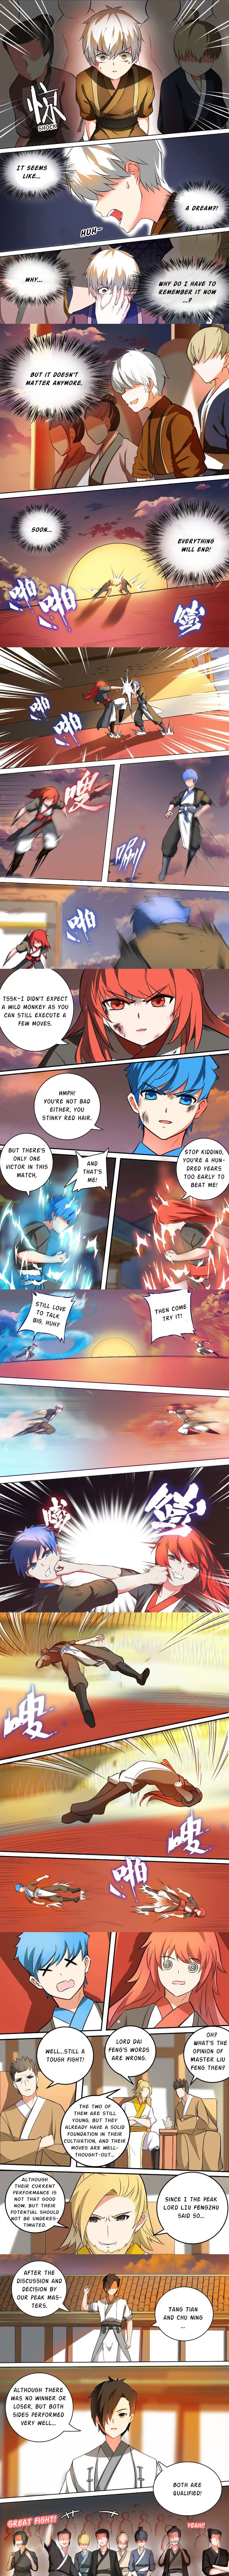 Ten Thousand Paths to Becoming a God Chapter 35 page 2